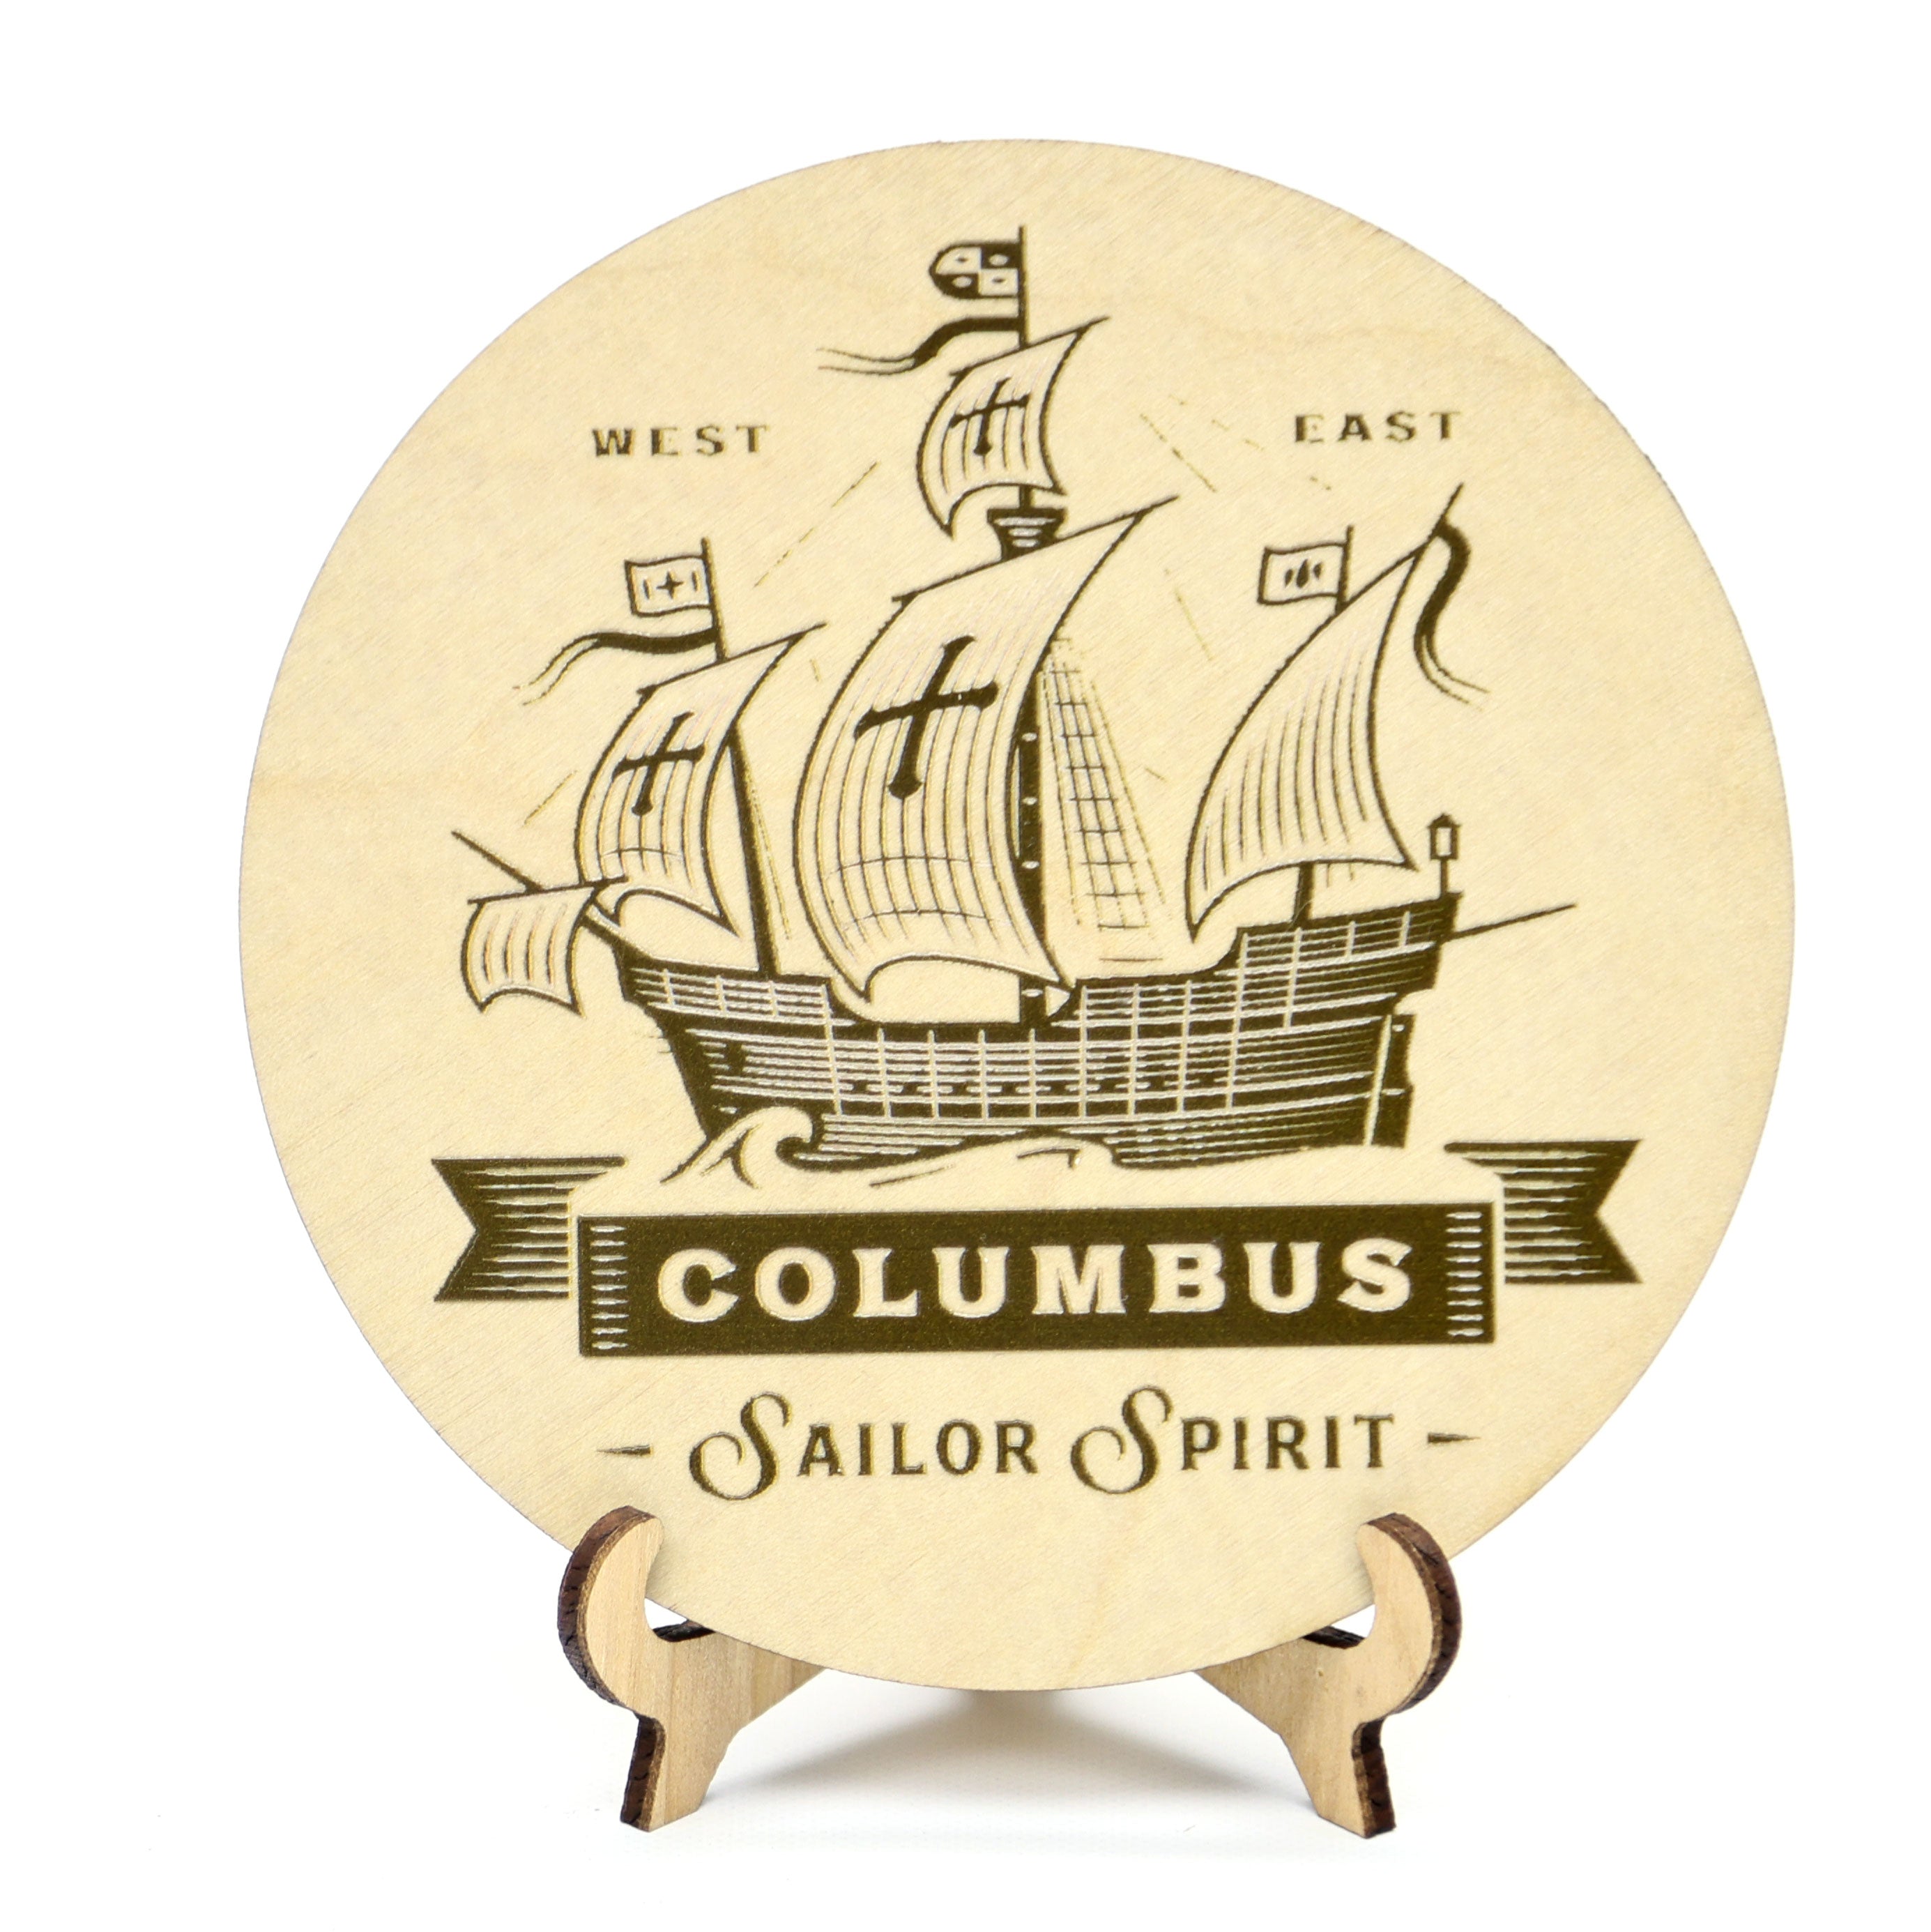 Wooden Coasters Set of 4 Pieces with a Nautical Designs